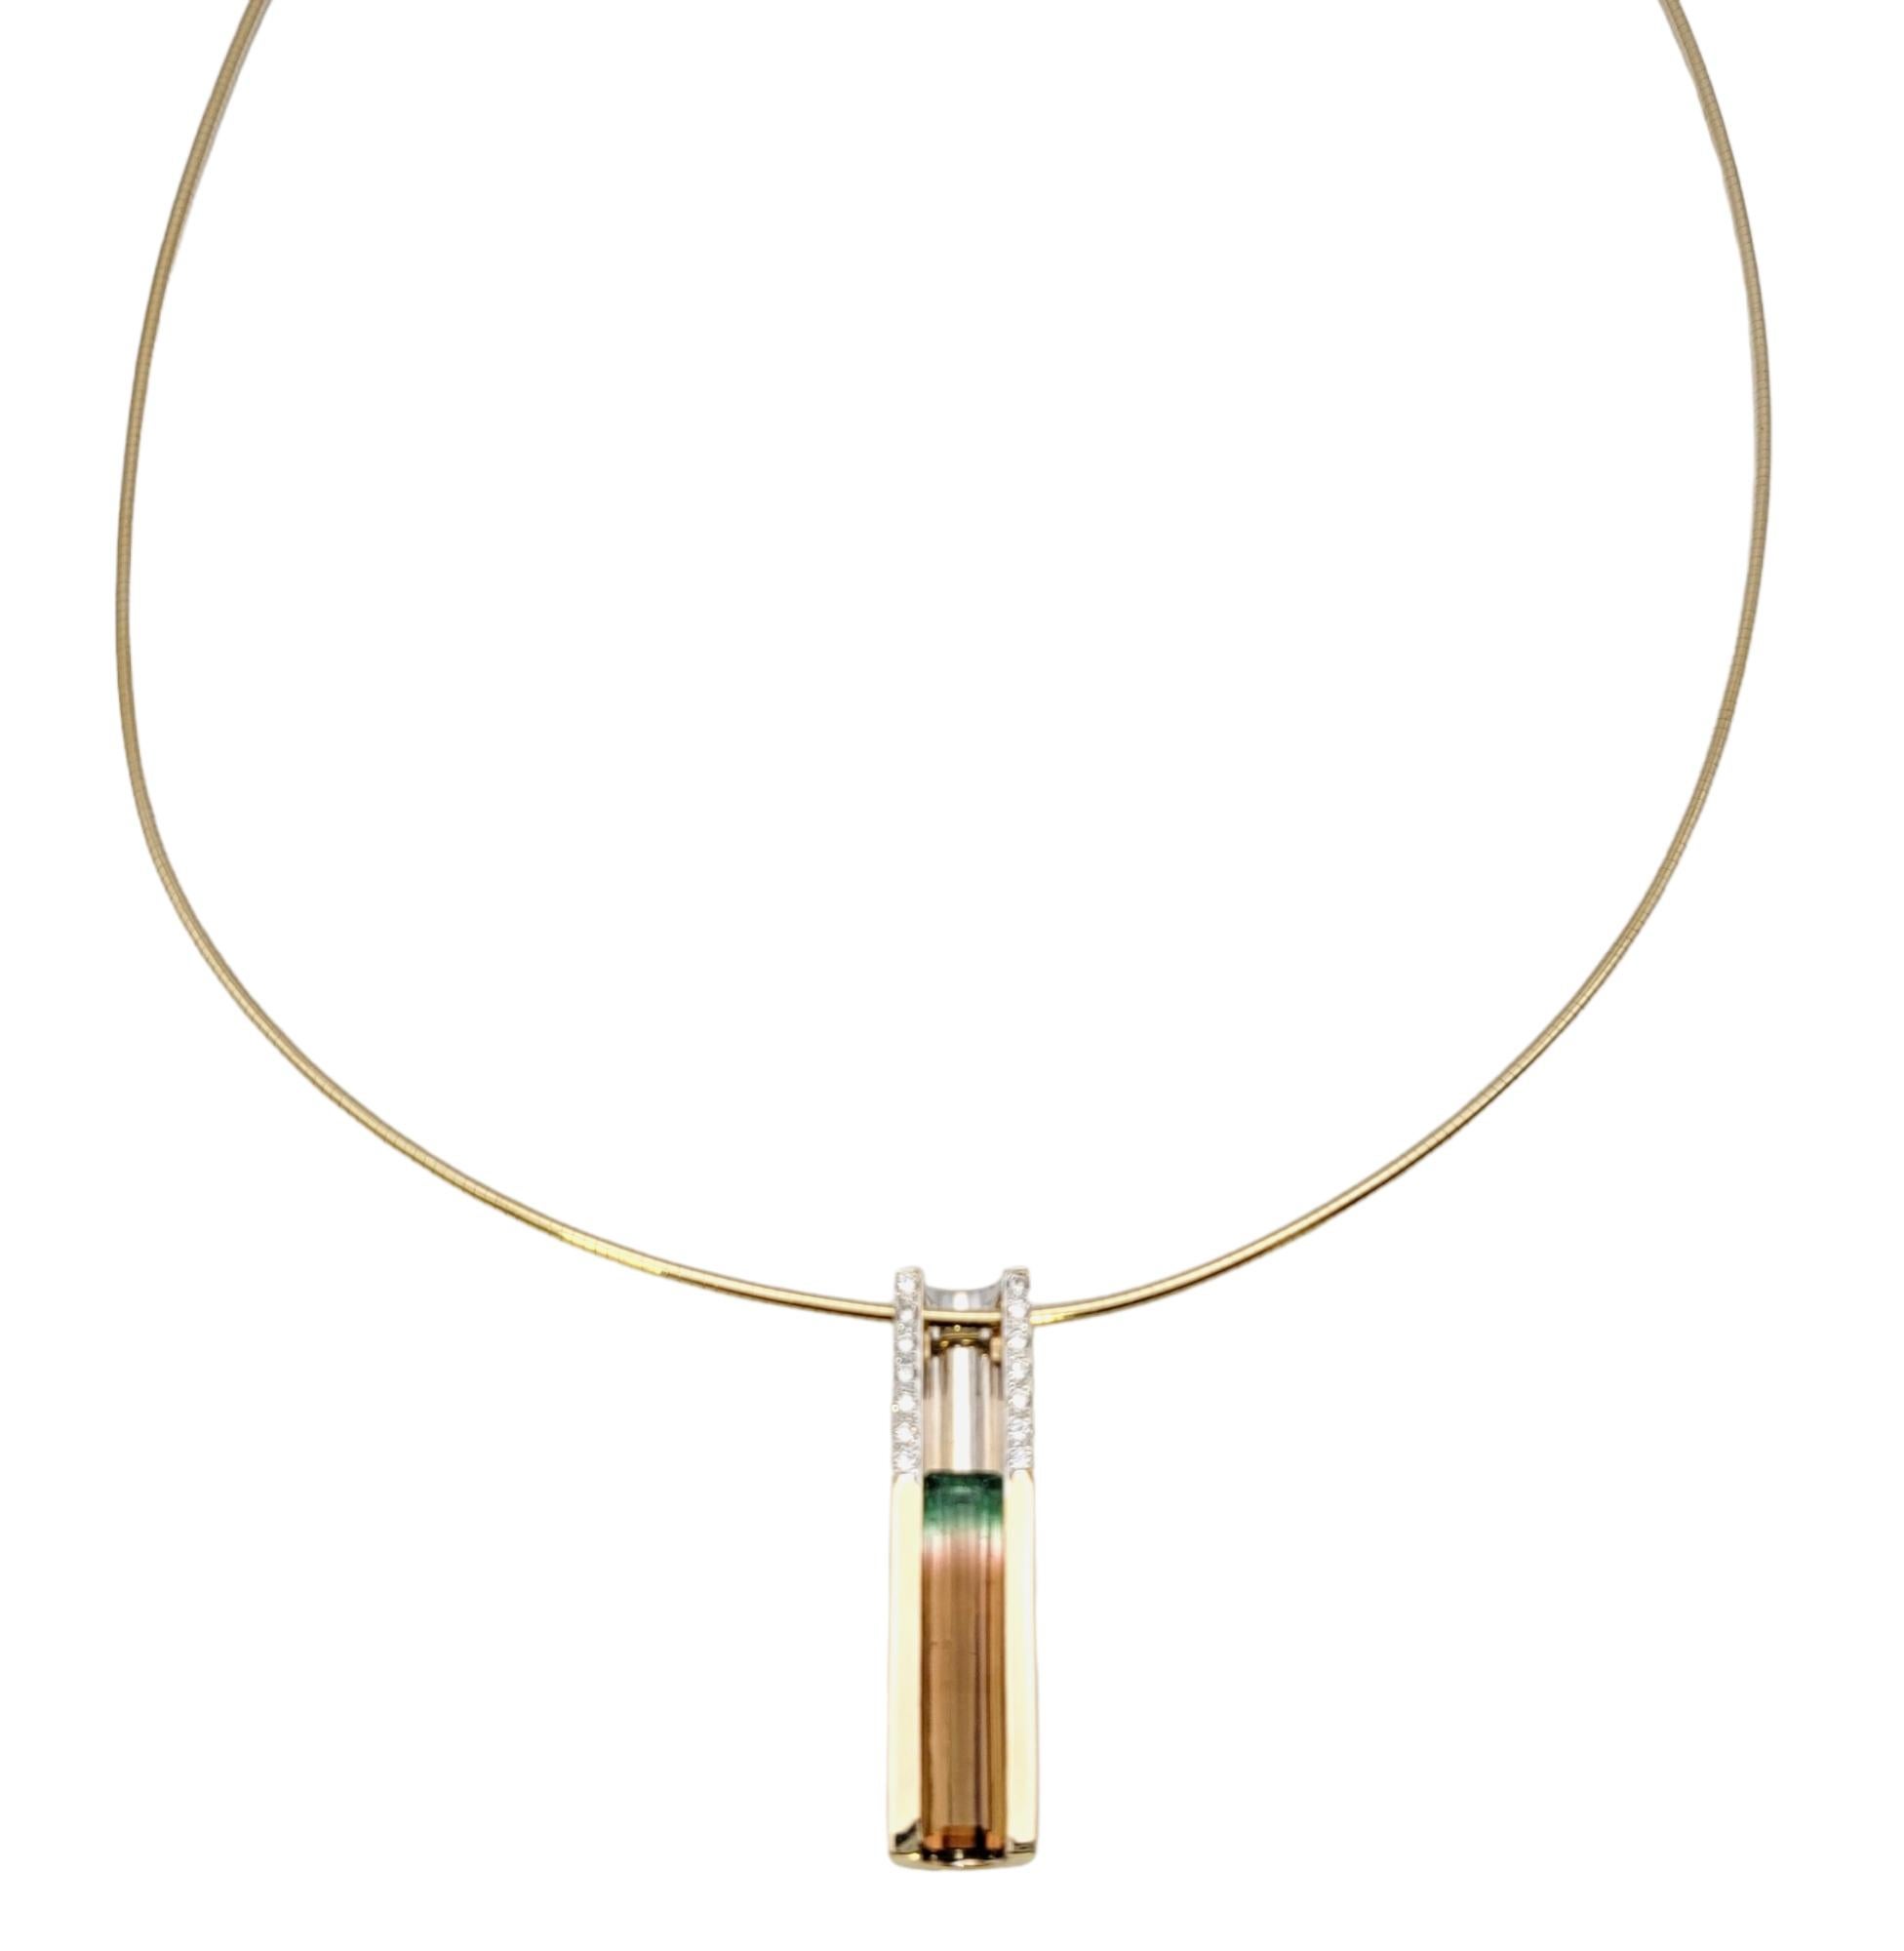 Gorgeous minimalist modern necklace with a unique pop of color. Though simple in style, this necklace is all the statement you will need. 

This lovely pendant style necklace features a thin 14 karat yellow gold snake chain adorned with a single